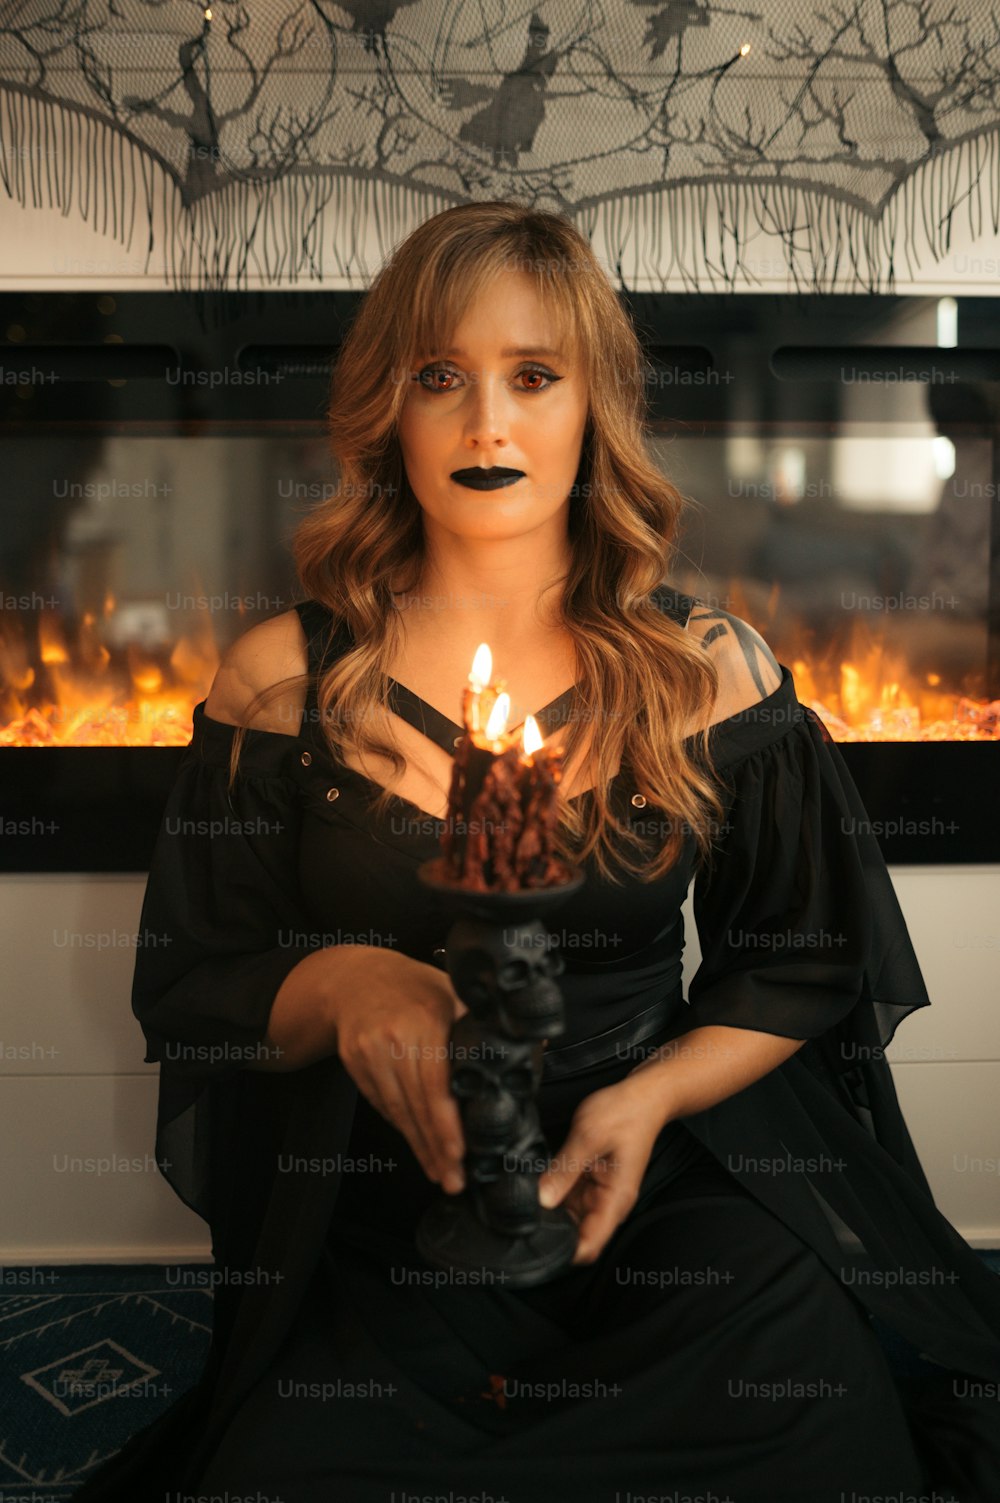 a woman in a black dress holding a lit candle